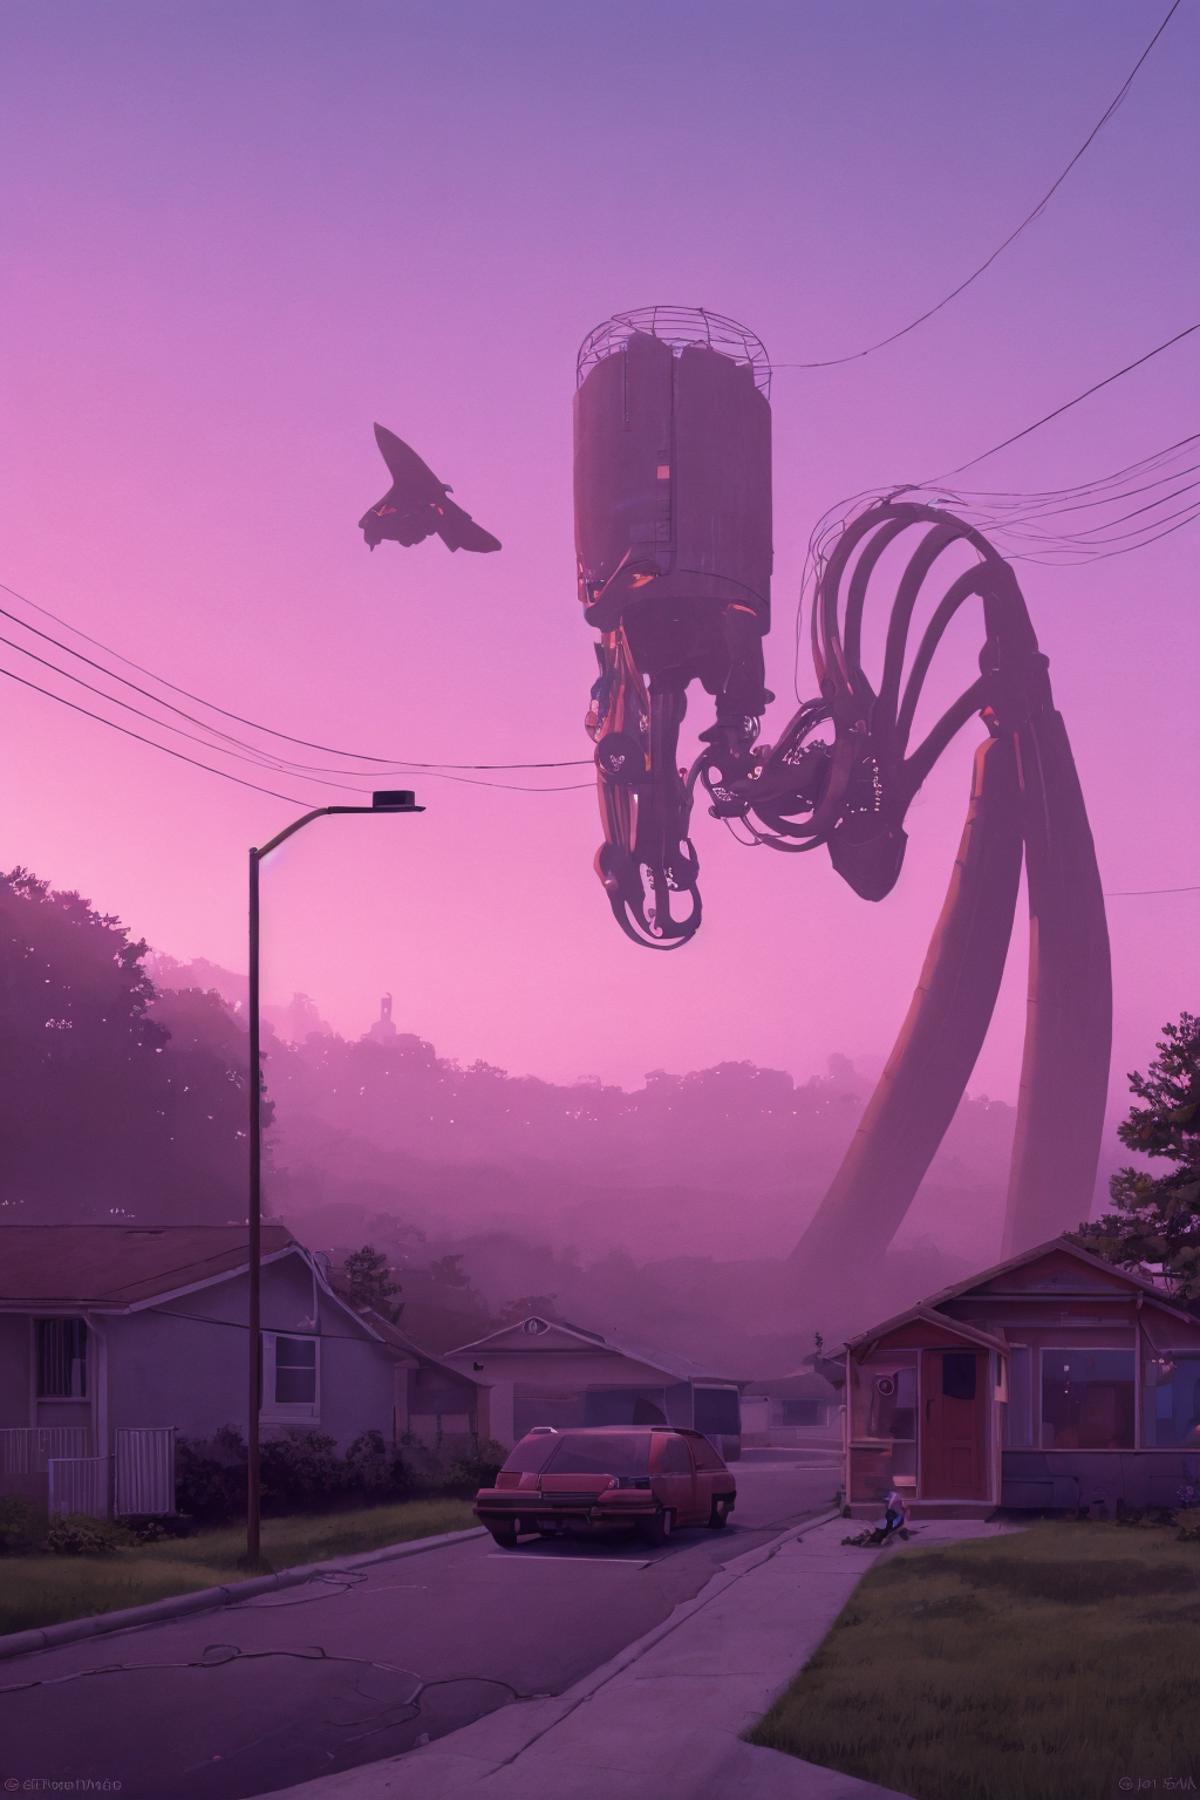 A purple sky with a giant robot and airplane.